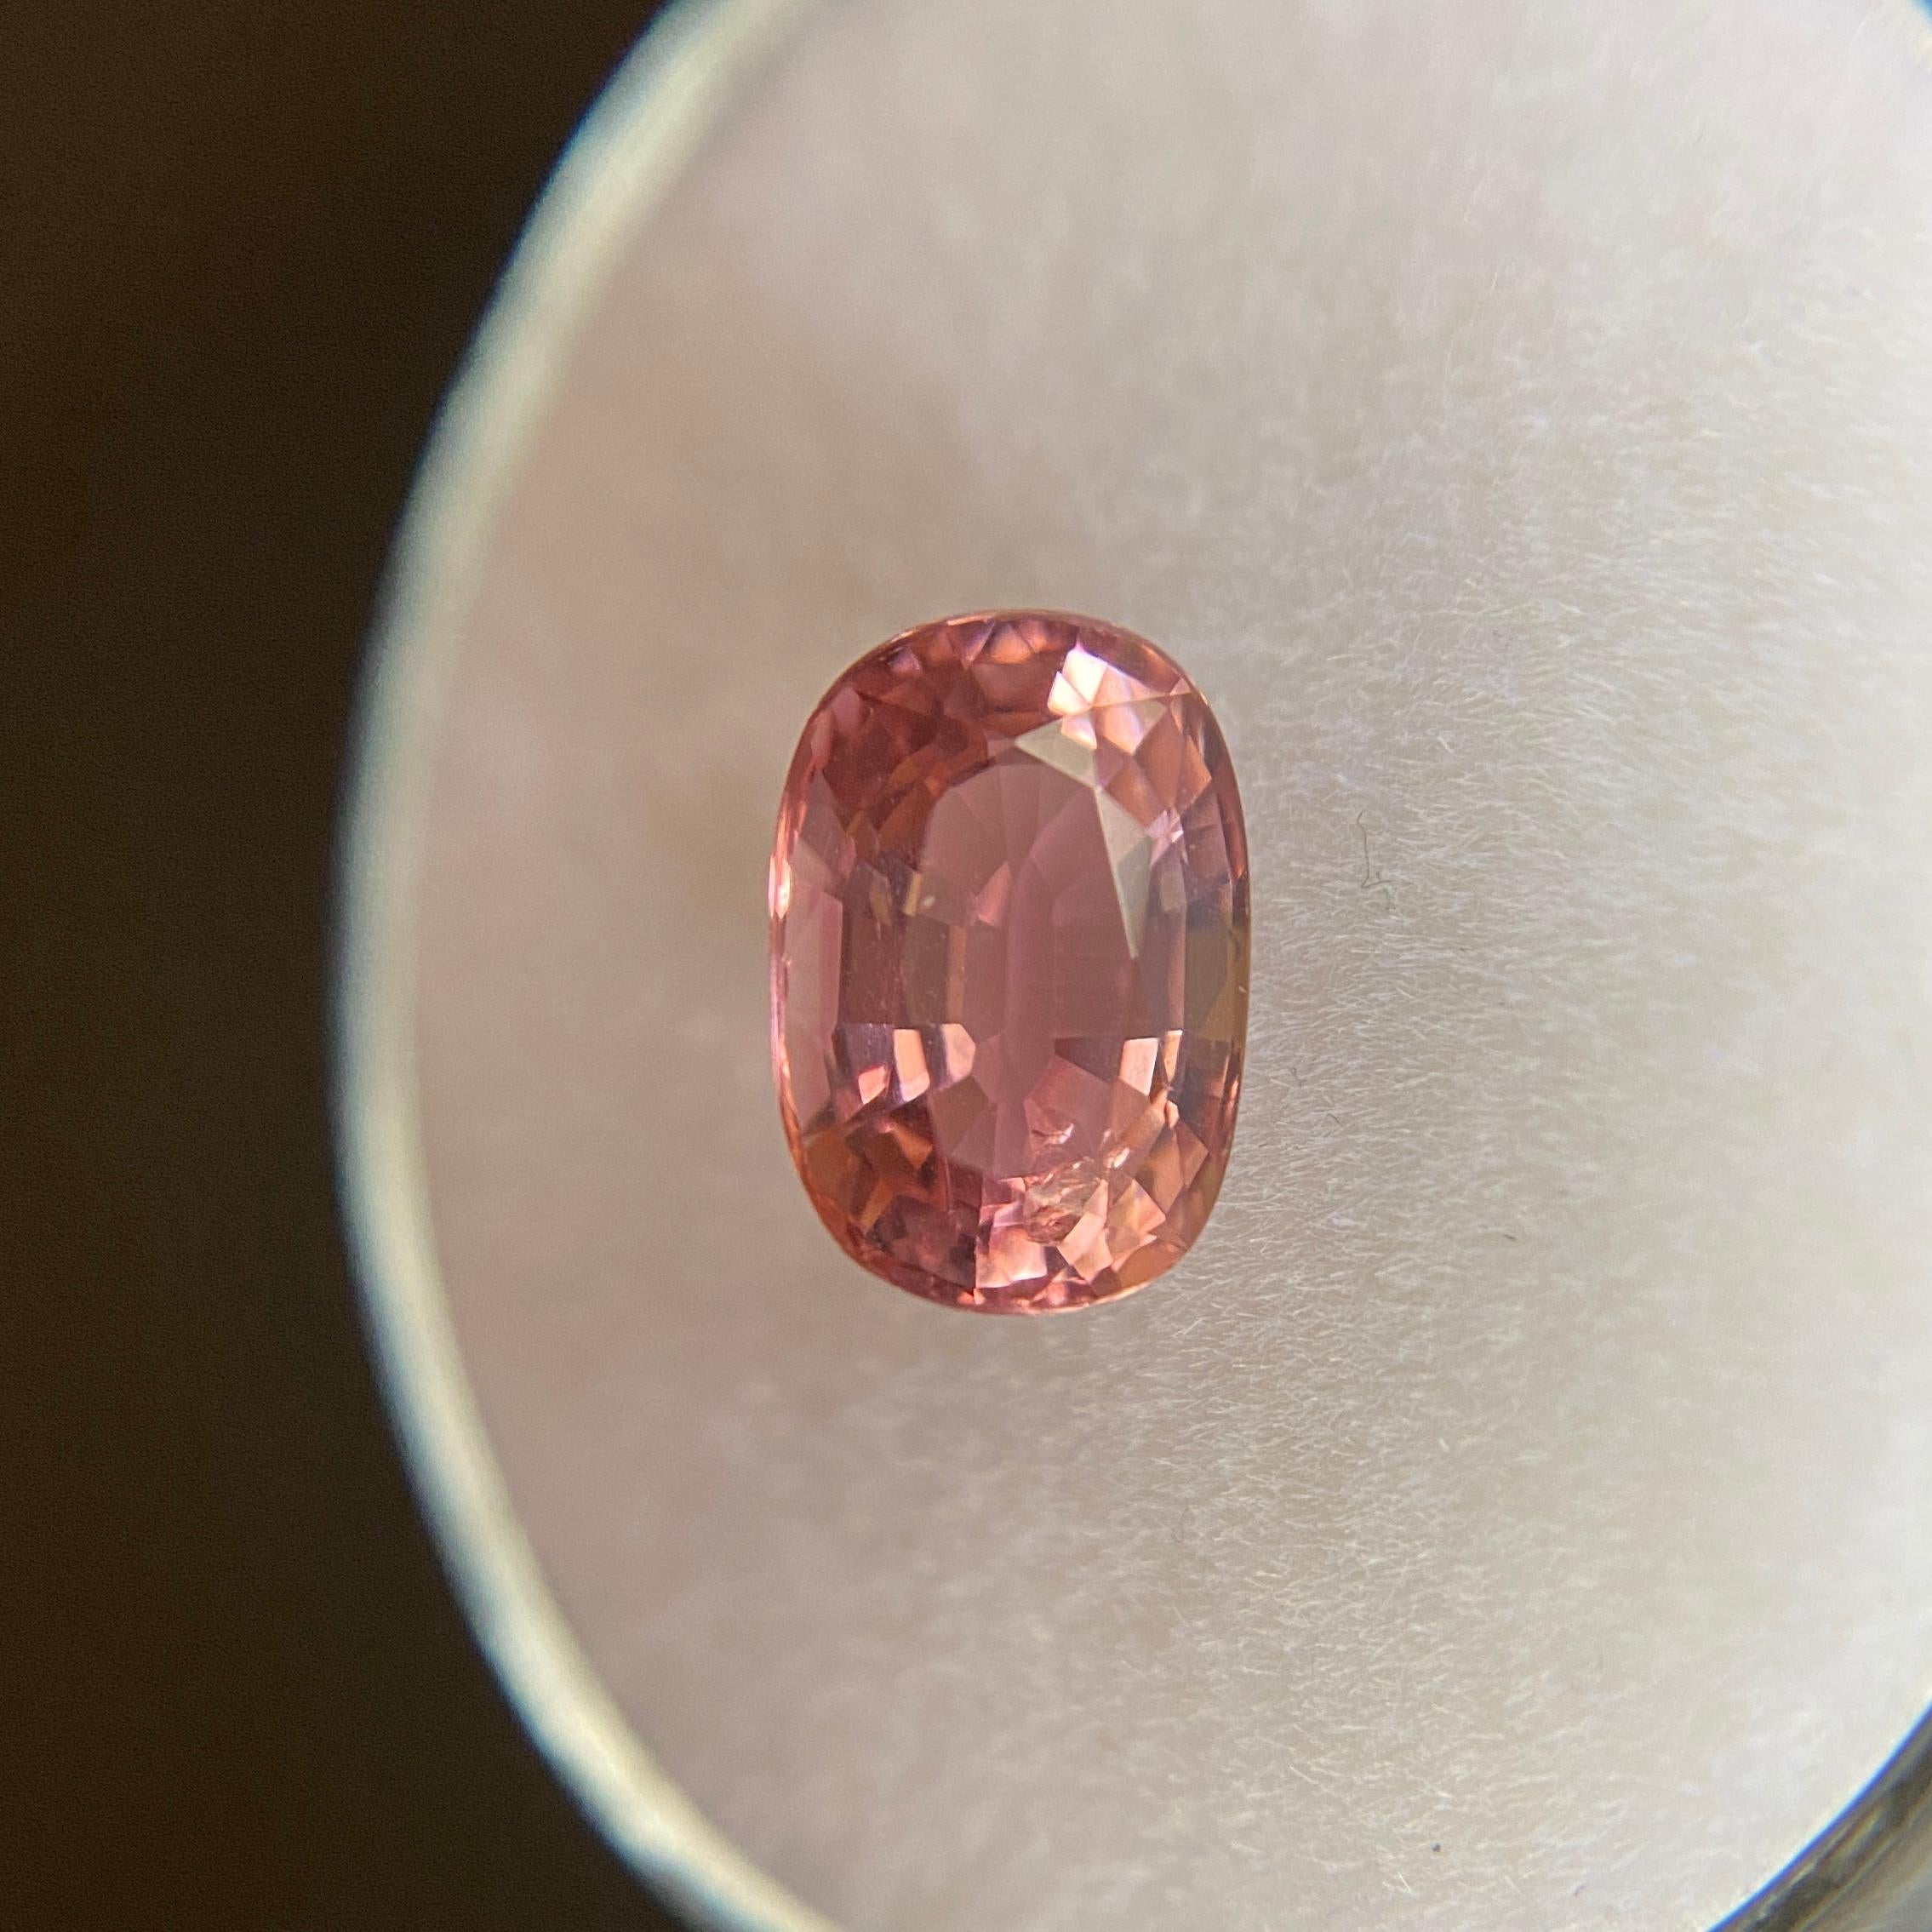 Fine Vivid Pink Tourmaline Gemstone.

1.36 Carat with a beautiful vivid pink colour and excellent clarity, very clean stone with only some small natural inclusions visible when looking closely.

Also has an excellent oval cut with good proportions